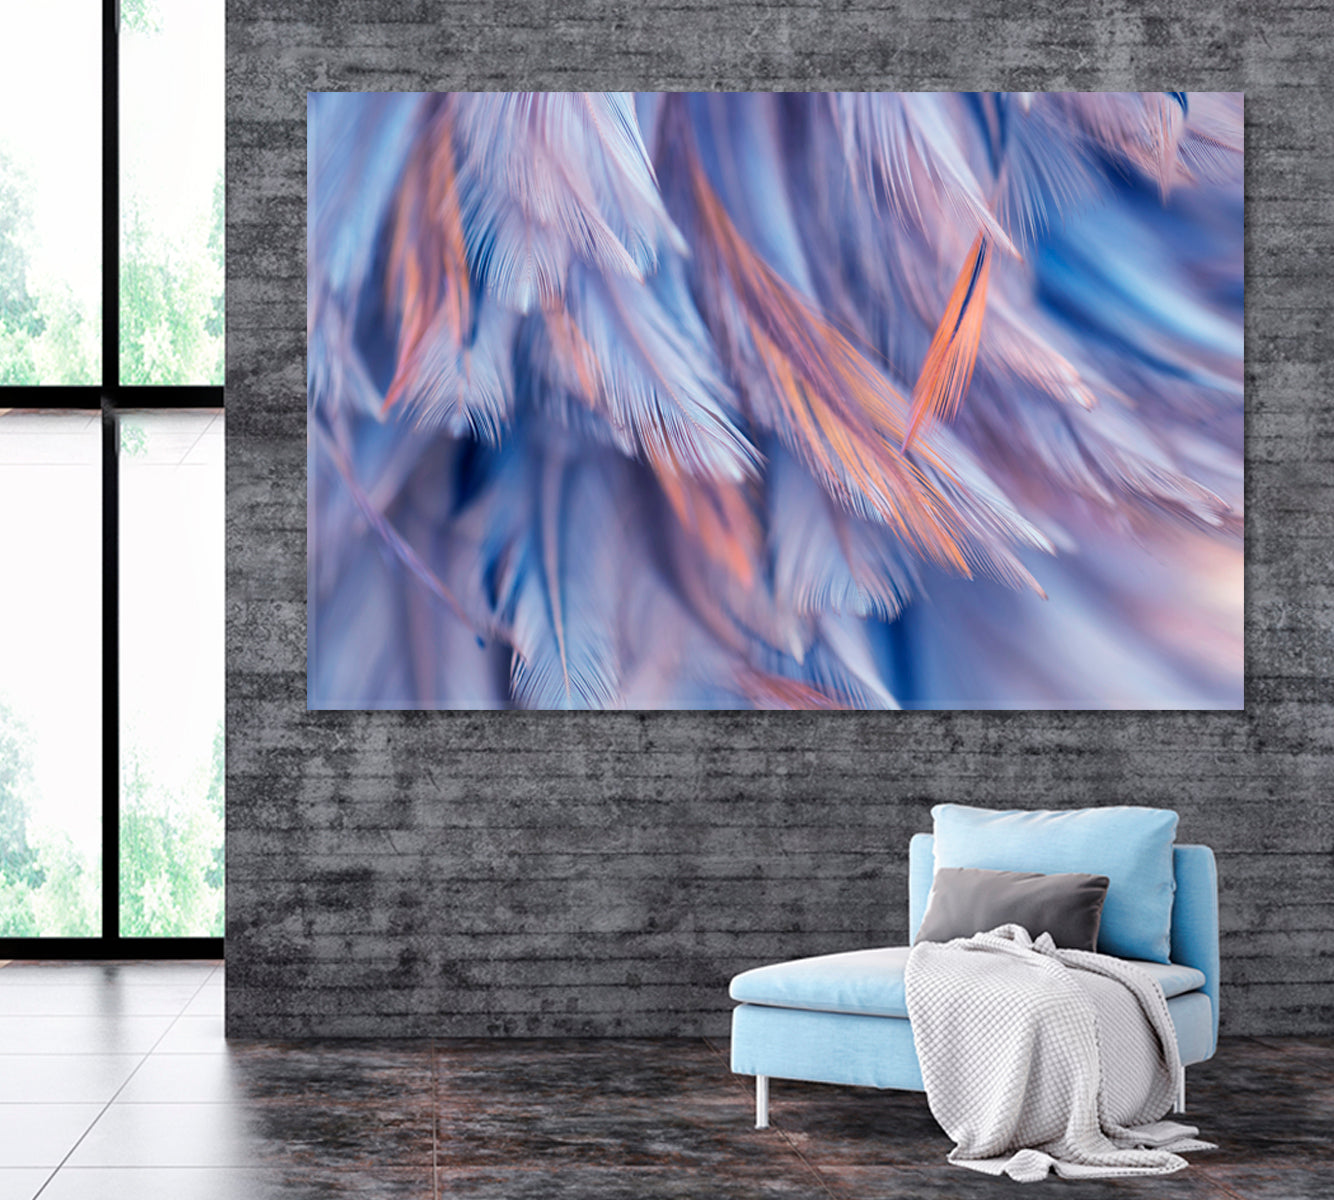 Feathers Canvas Print ArtLexy 1 Panel 24"x16" inches 